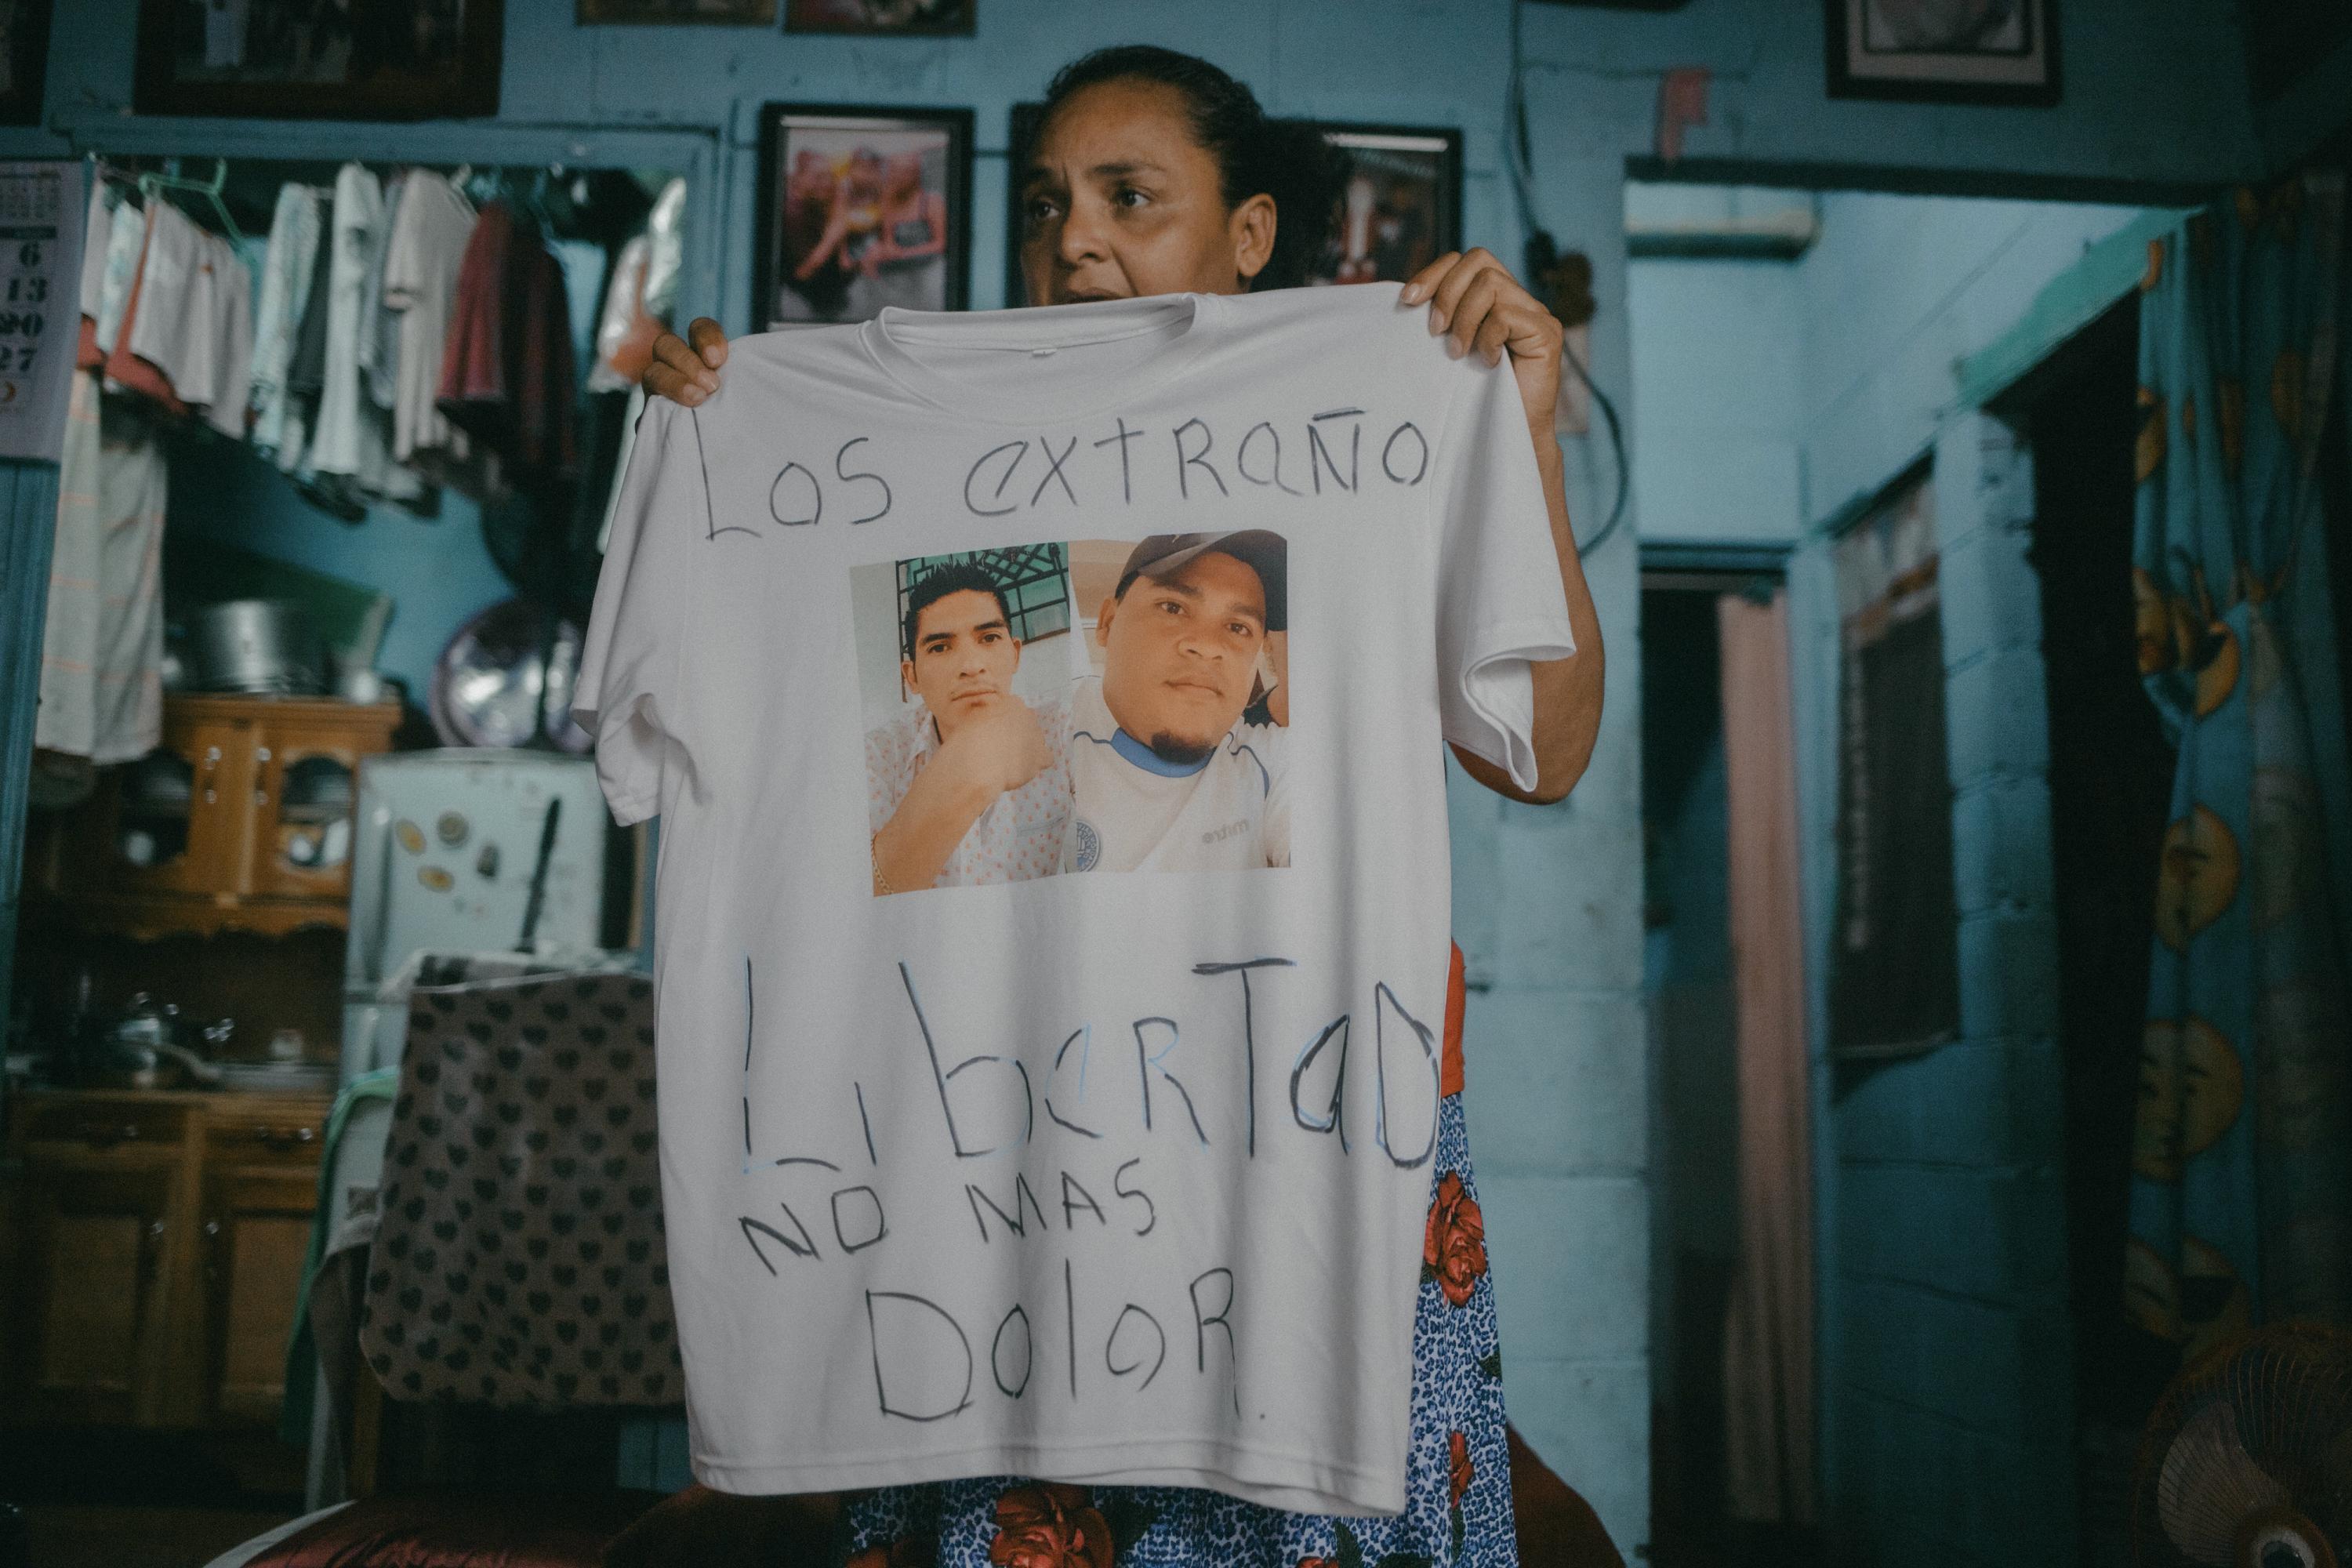 Cecilia Ábrego holds up a T-shirt with pictures of her son and her brother, who were arrested during the state of exception, and whom she now prioritizes by sending care packages with food from her scarce home supply. Photo Carlos Barrera